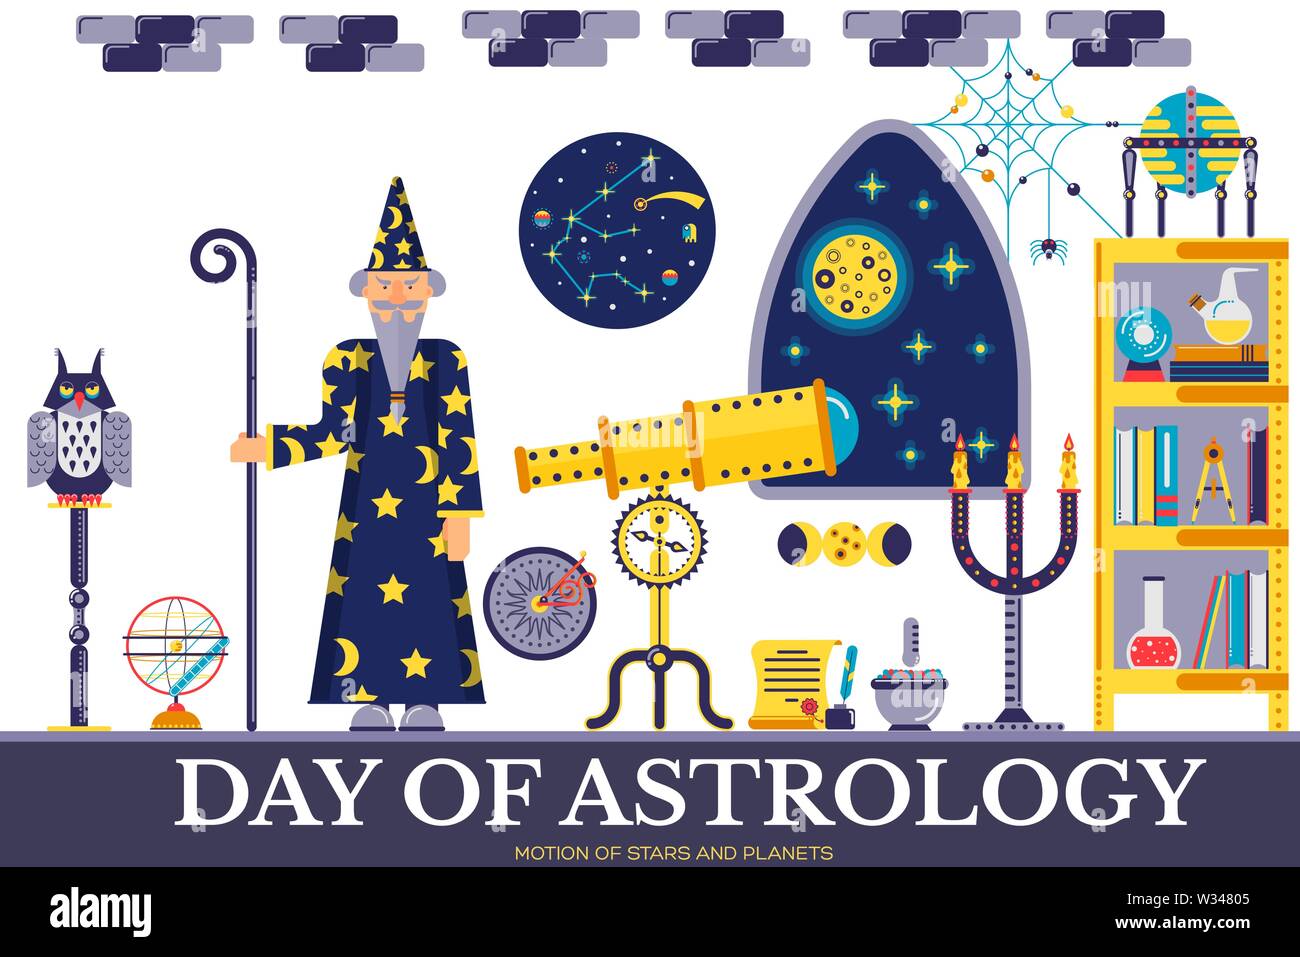 Senior astrologer with beard in hat standing in lab. Ancient alchemy tools and equipment: telescope, globe, bulbs, crystal ball, books are in room. Ve Stock Vector